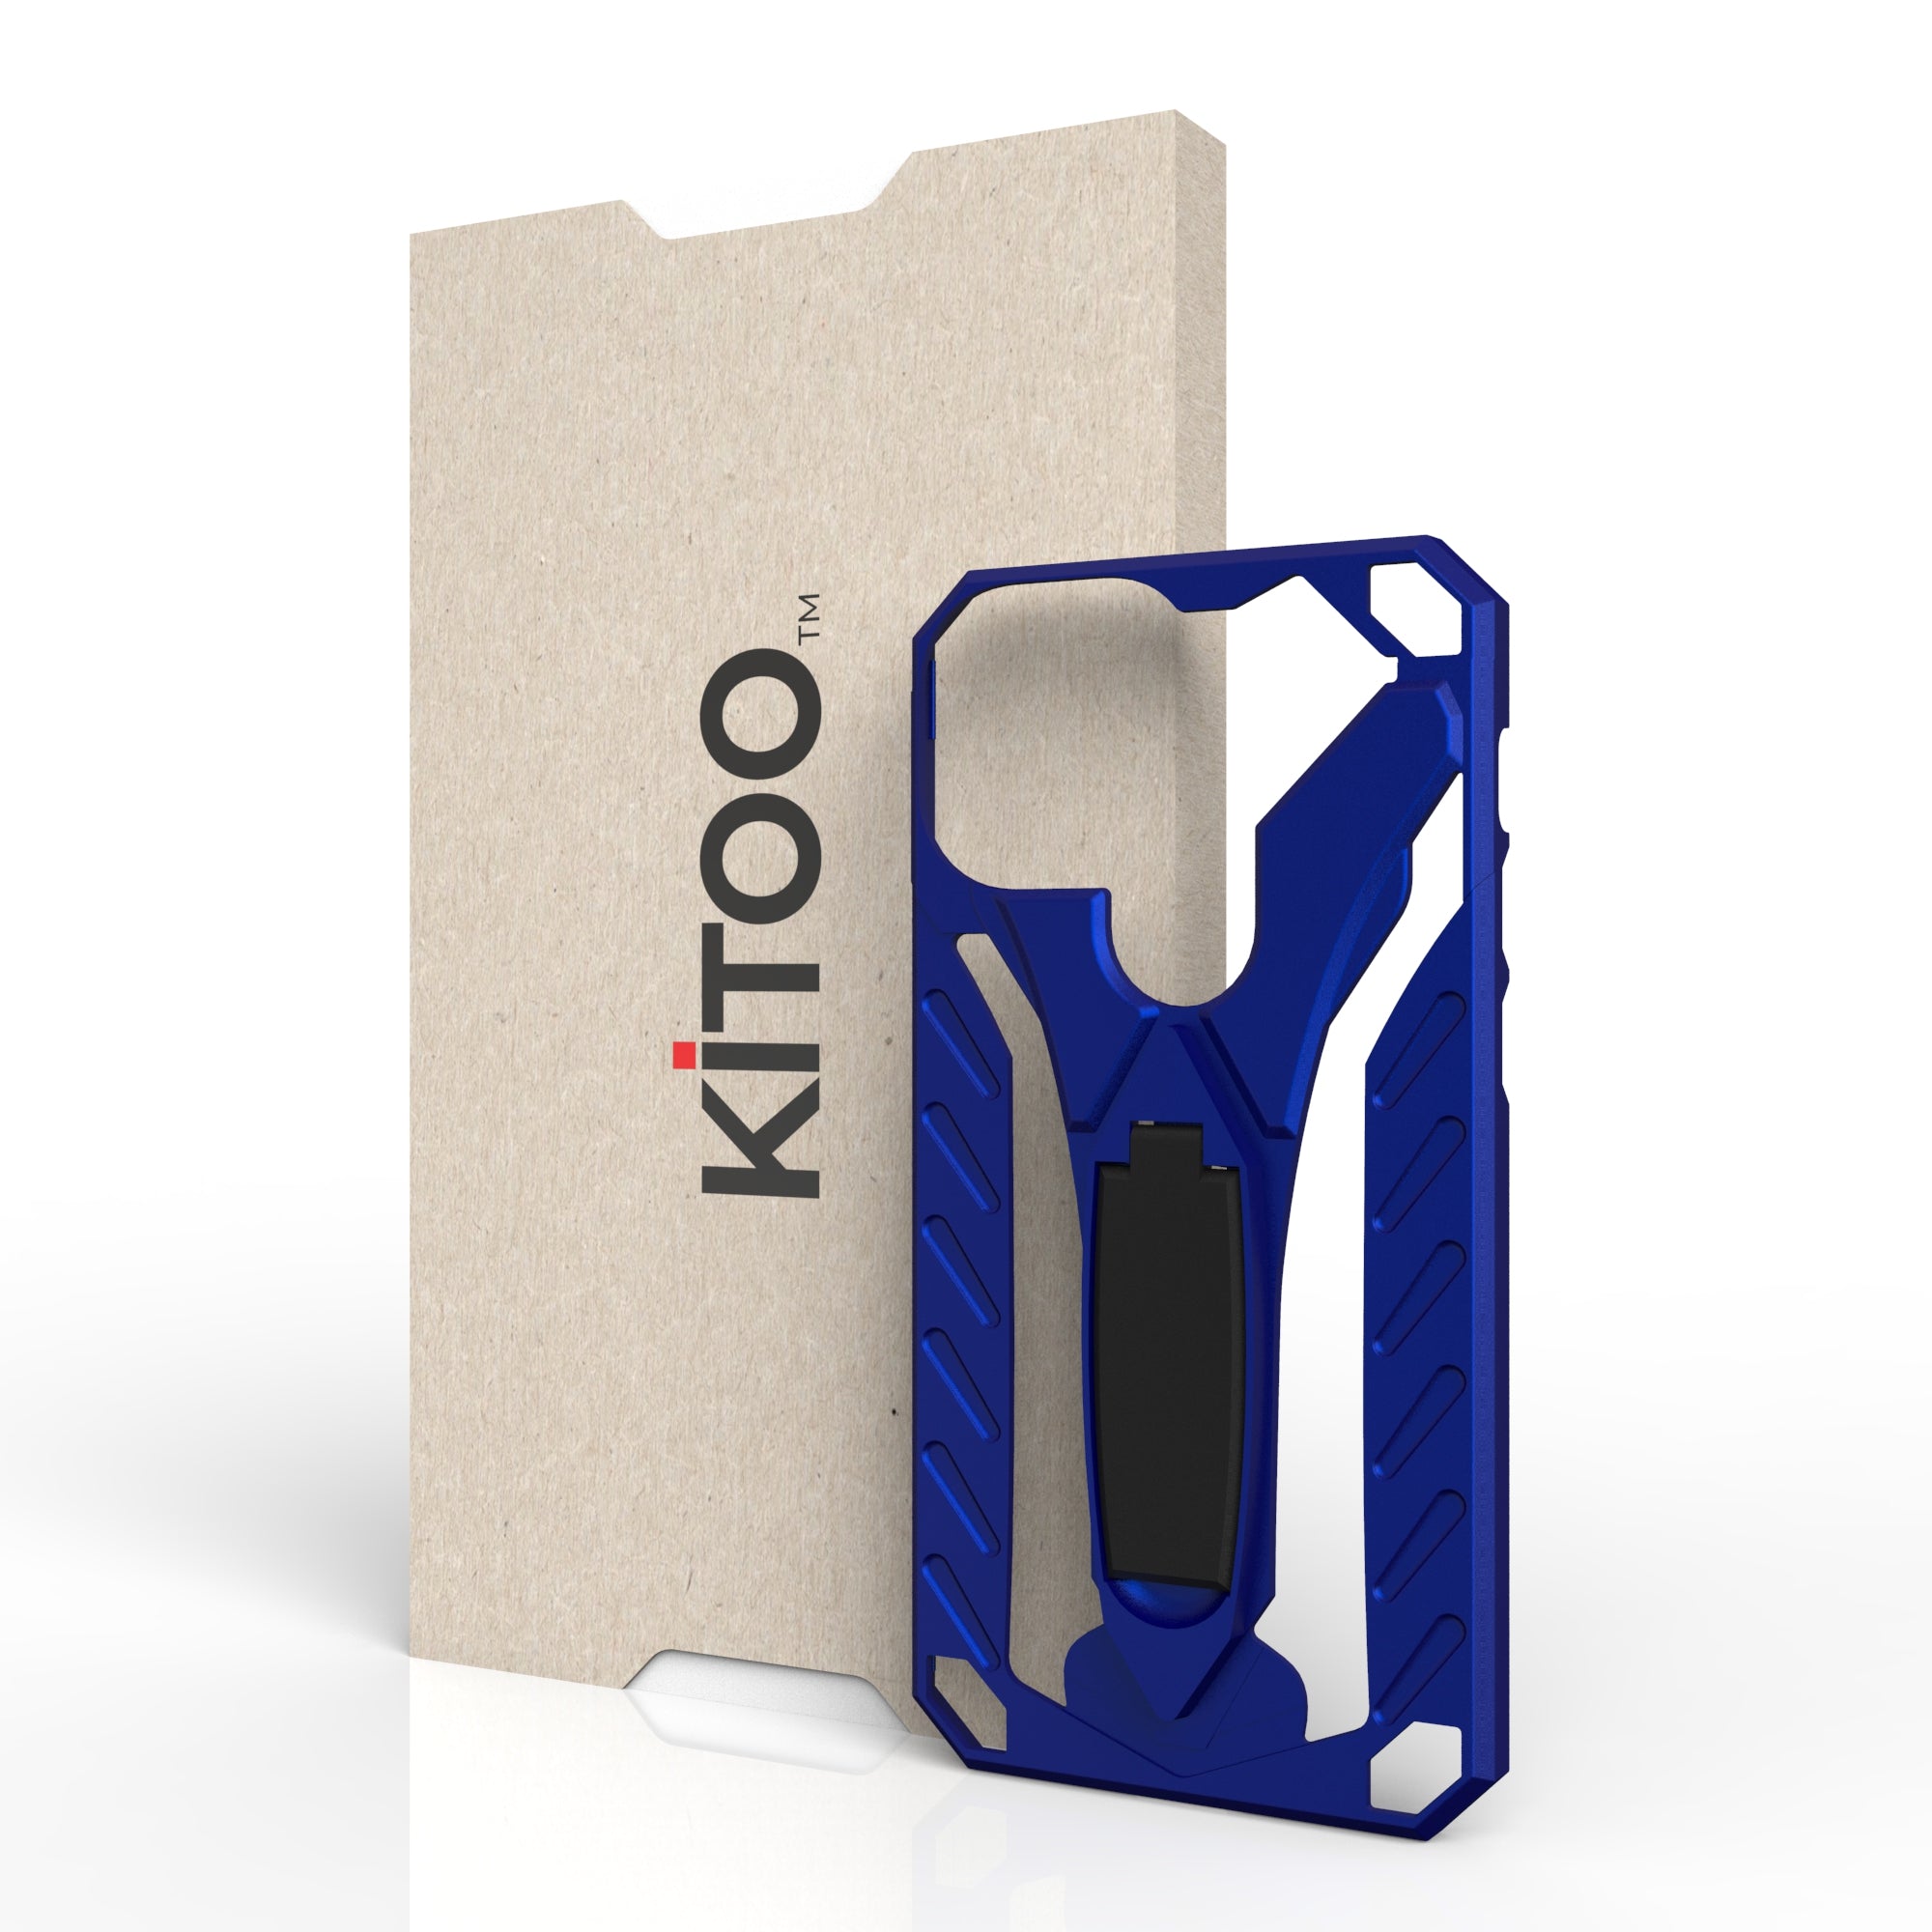 Kitoo Kickstand Panel Designed for iPhone 13 Mini case (Spare Part only) - Blue